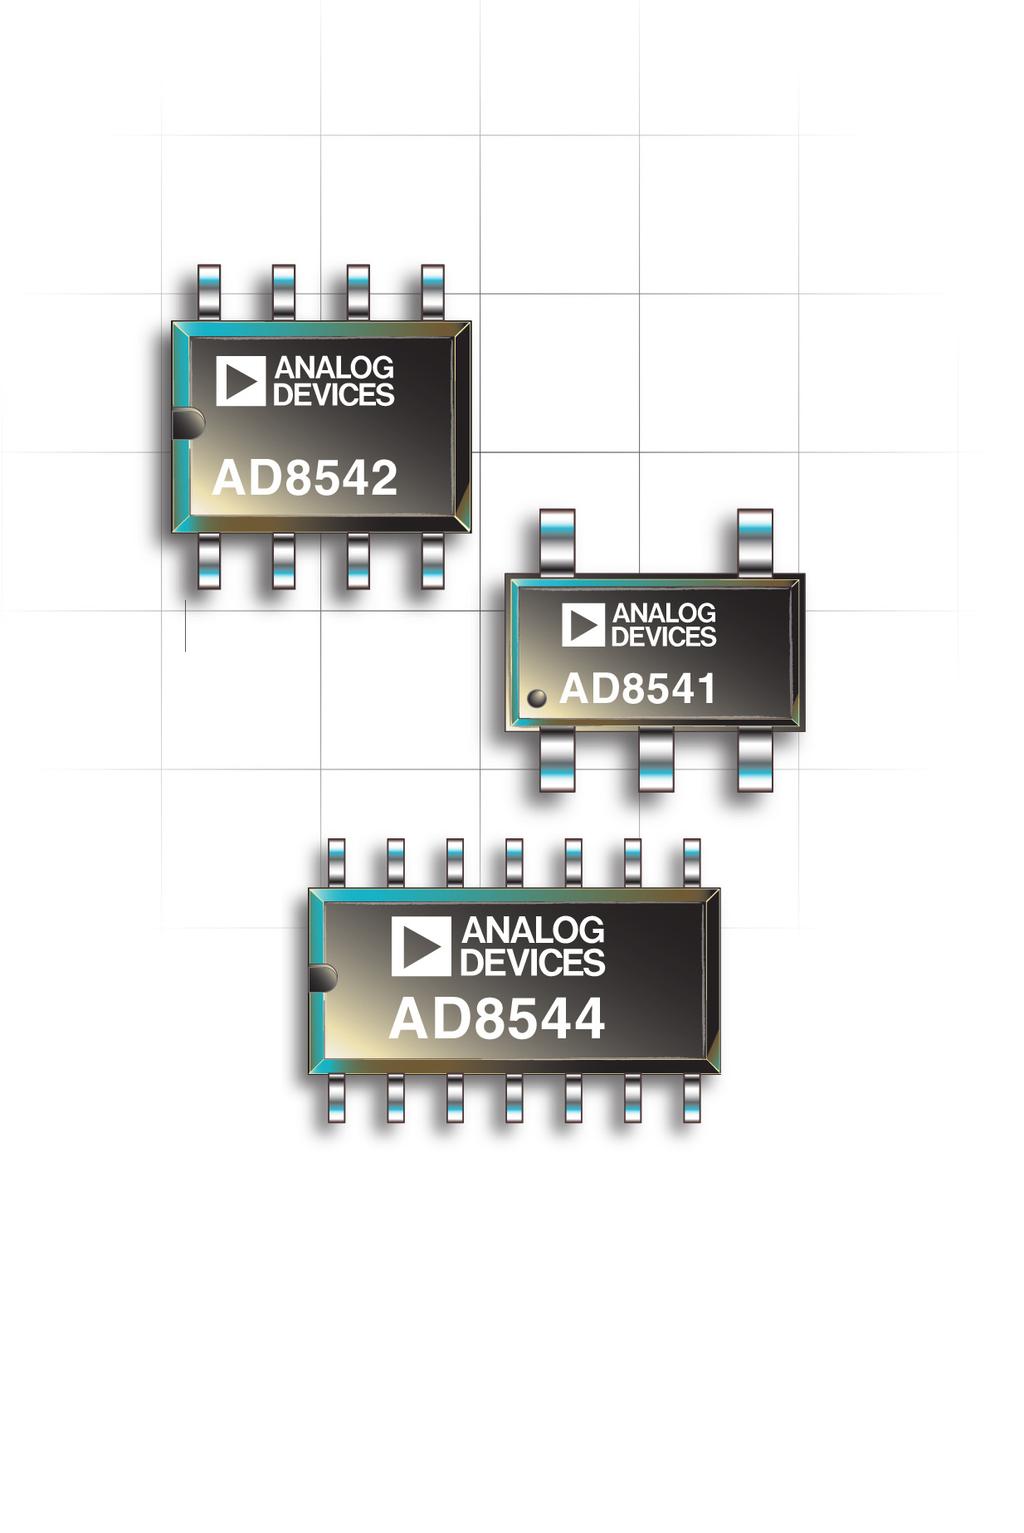 Low Current, Rail-to-Rail I/O, Single- Operational Amplifier Family The AD8541 family of amplifiers offers a bandwidth of 1 MHz with a very modest supply current of only 55 ma maximum per channel.